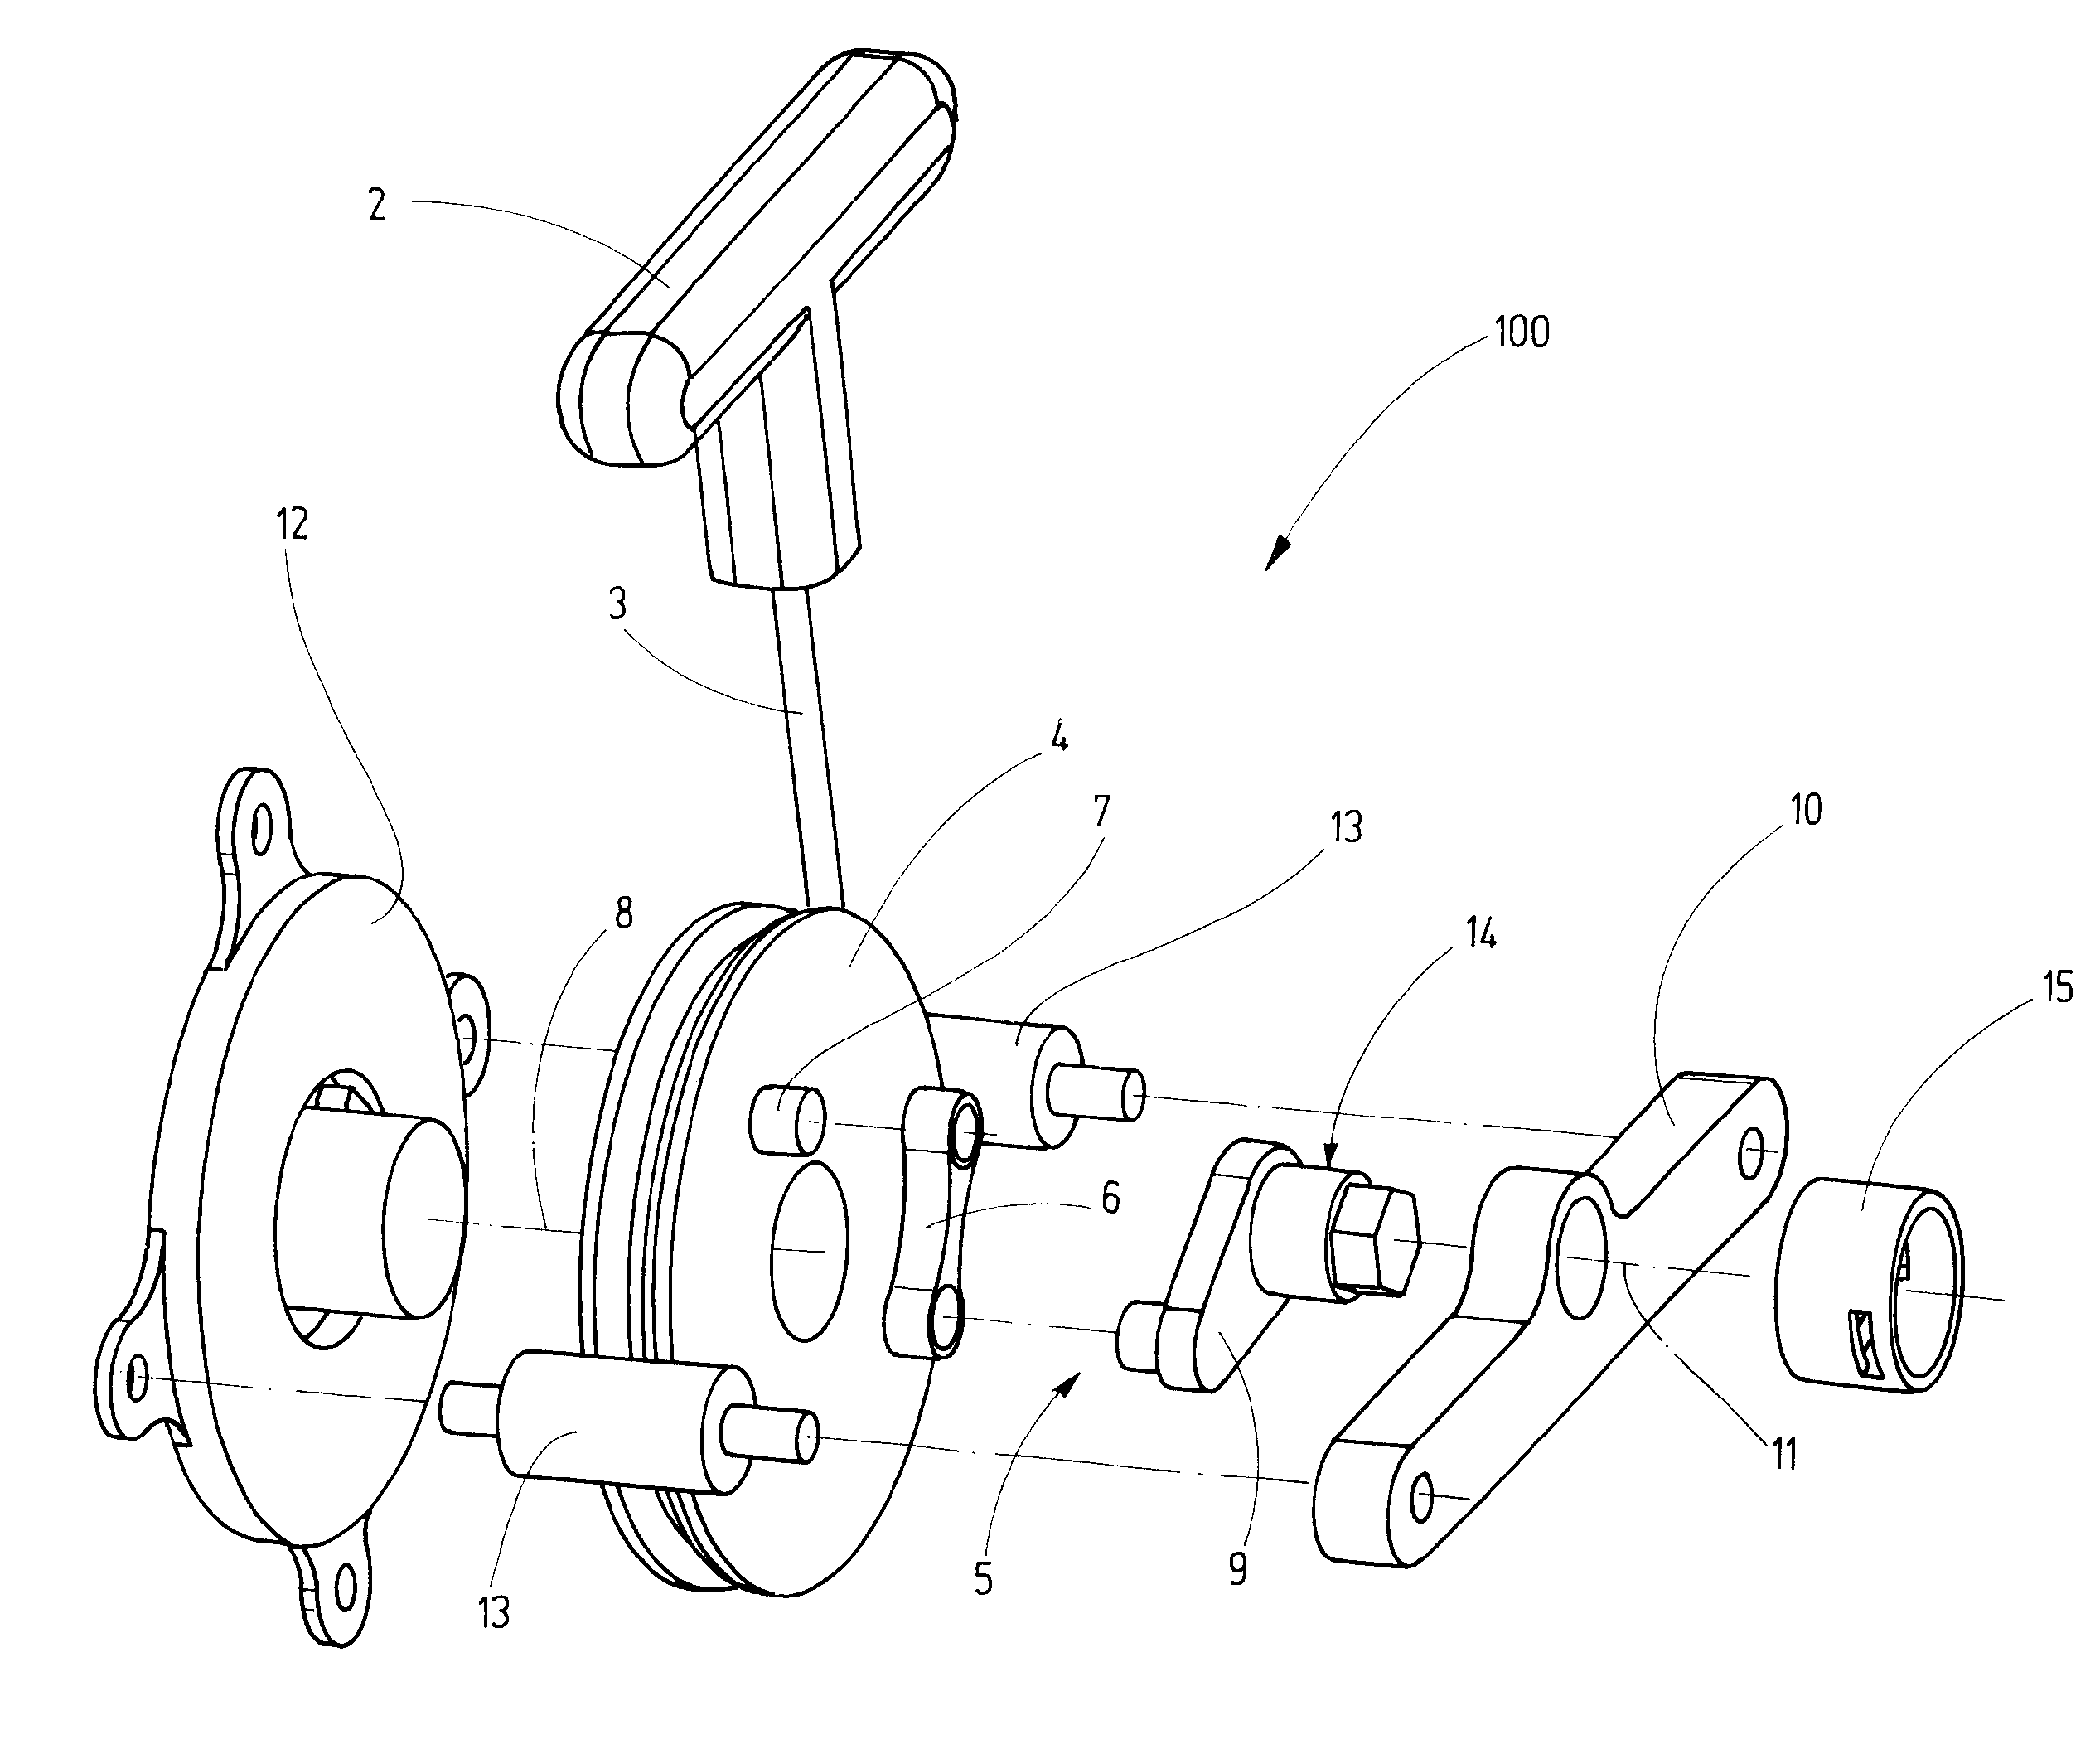 Starter device for a motor driven machine